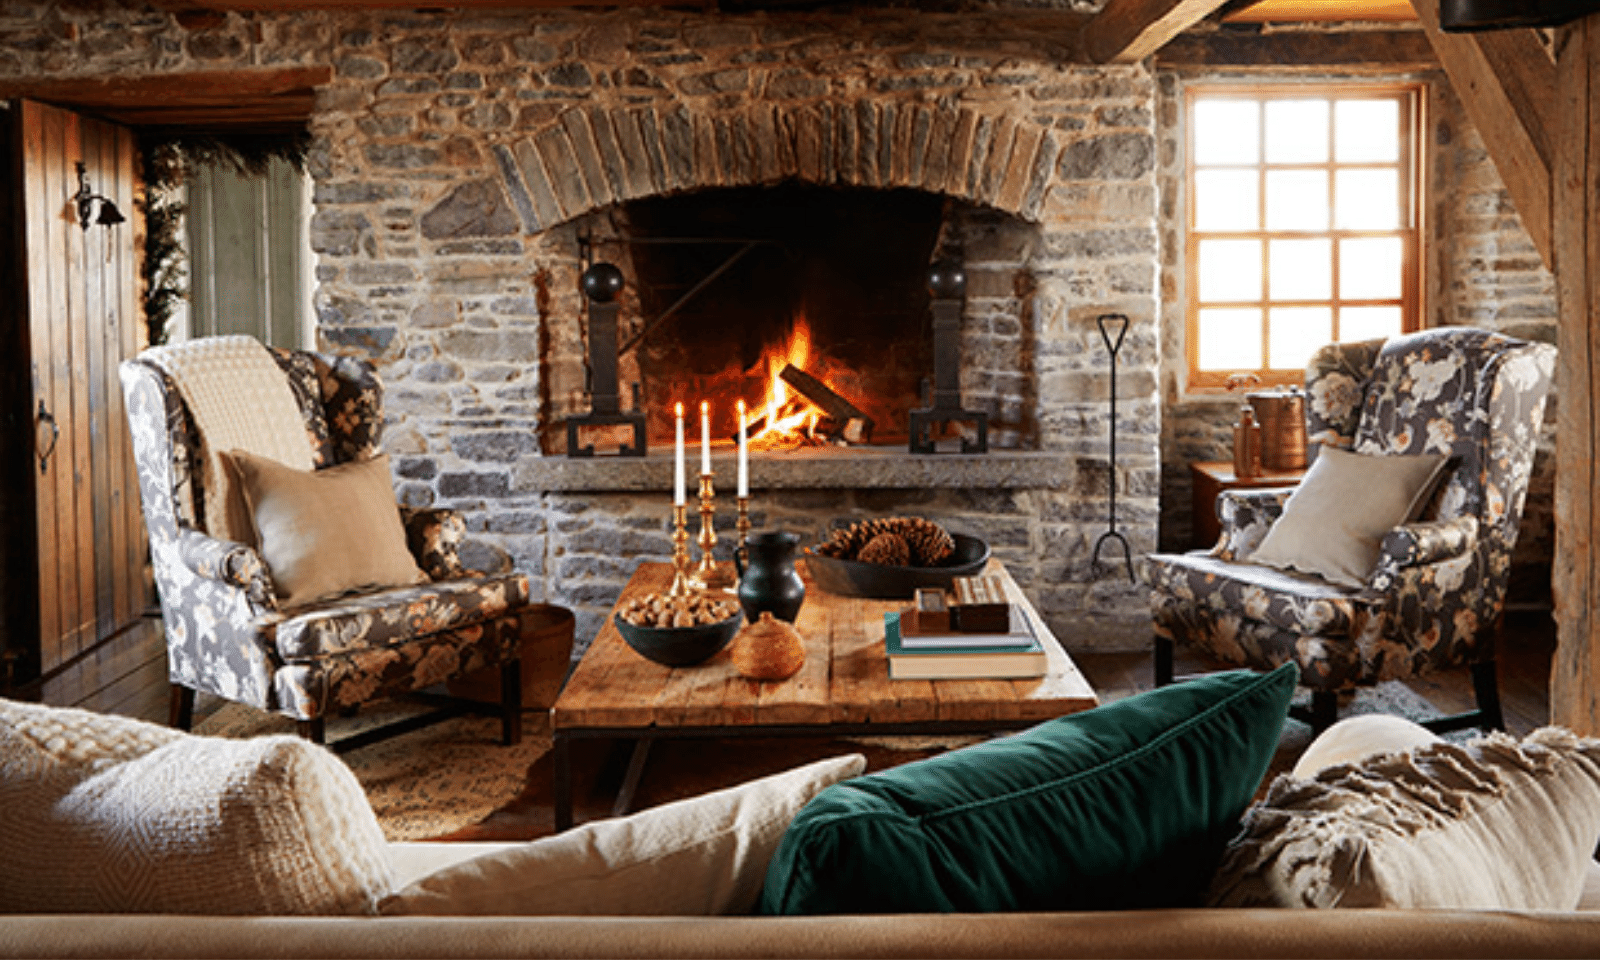 HOW TO WARM UP YOUR LIVING ROOM IN WINTER